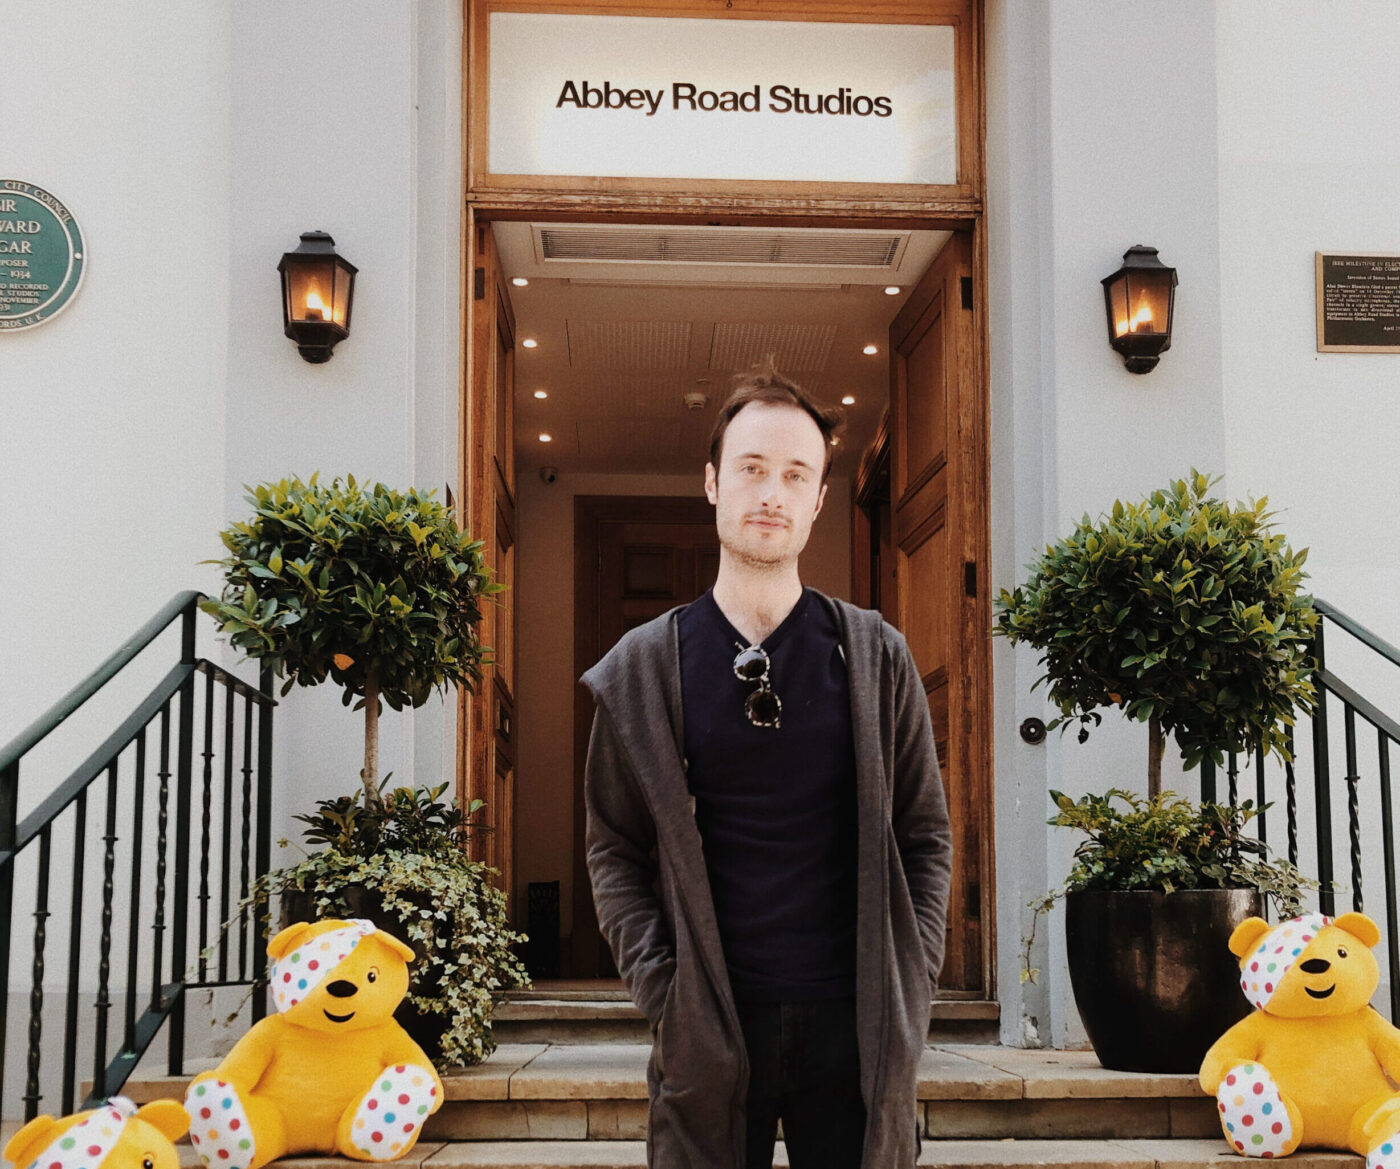 Artist standing in front of Abbey Road Studios on steps